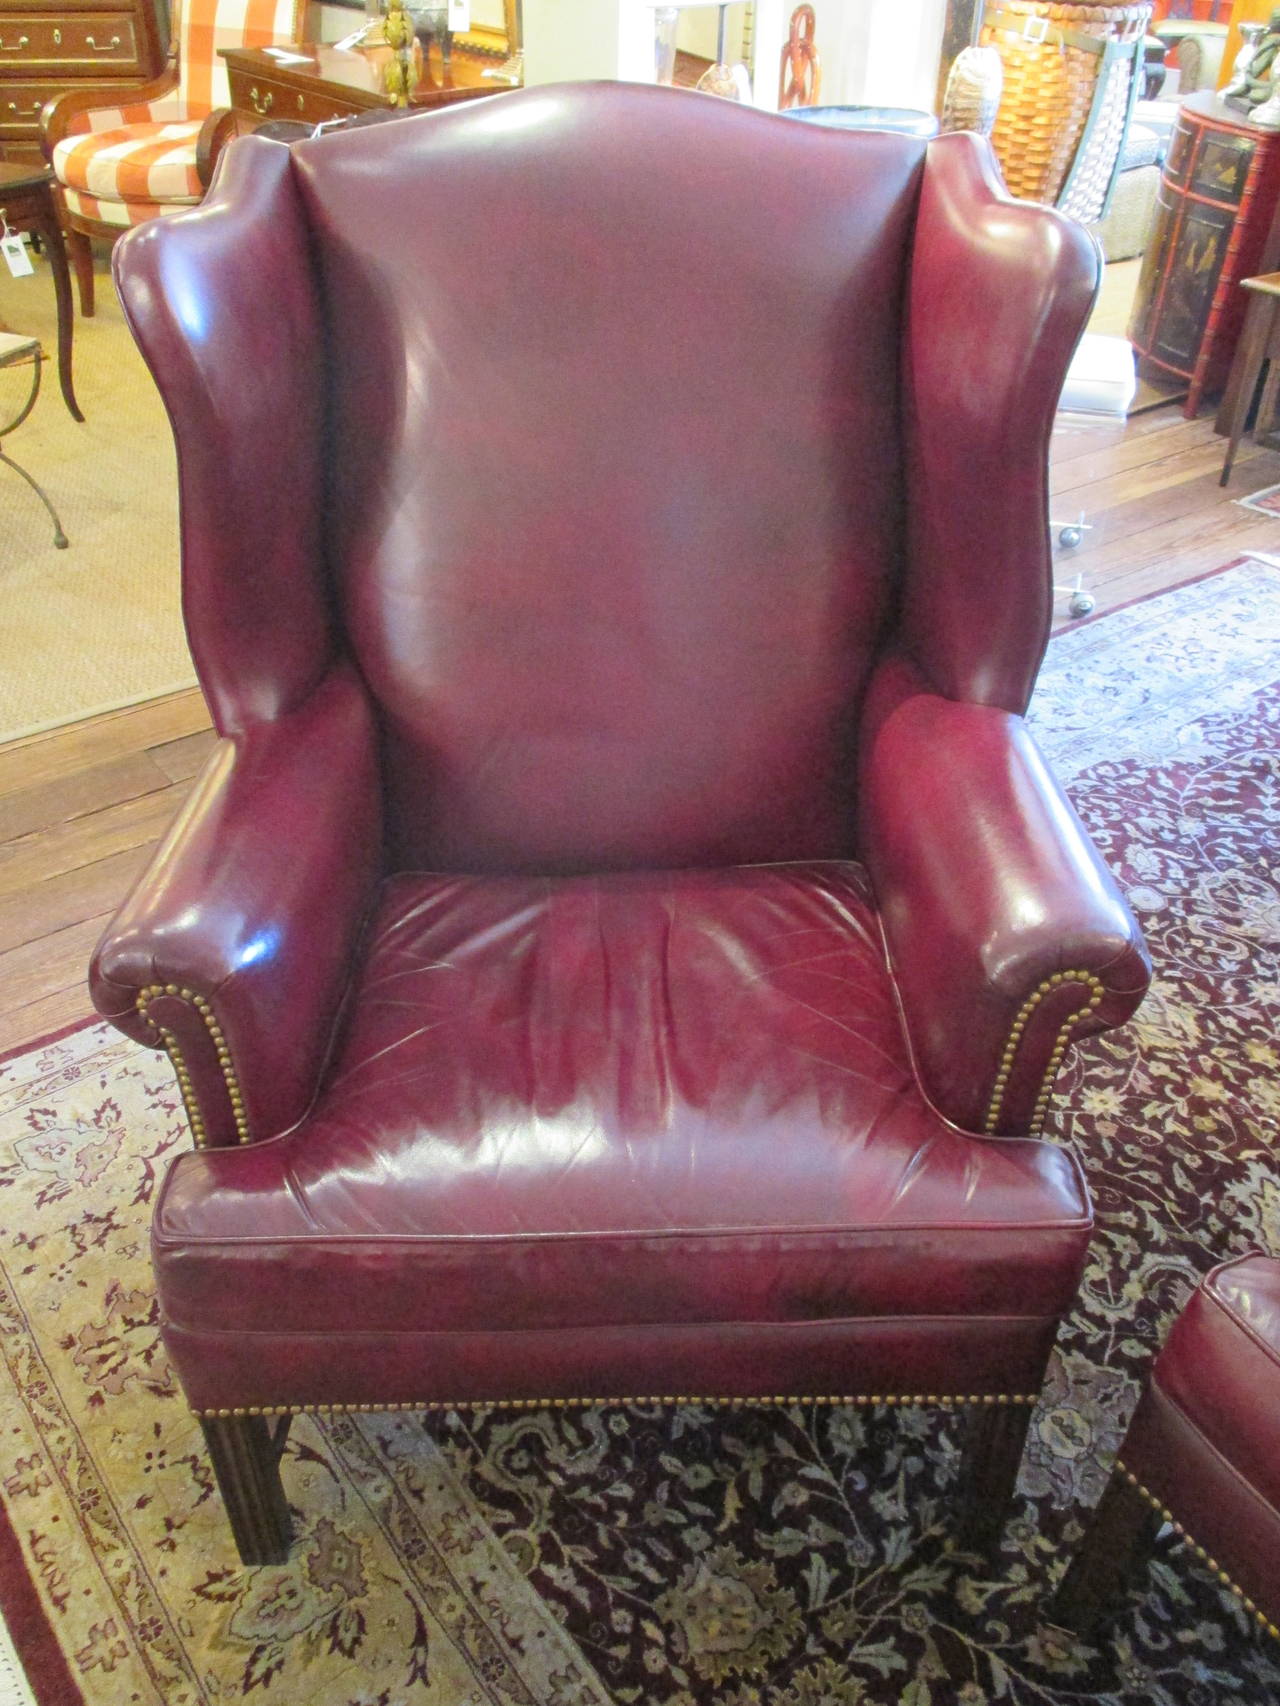 Supple cordovan wine colored leather with nailhead details, by Hancock and Moore. Comfortable and Classic wing chairs.
Dimension: Seat 20